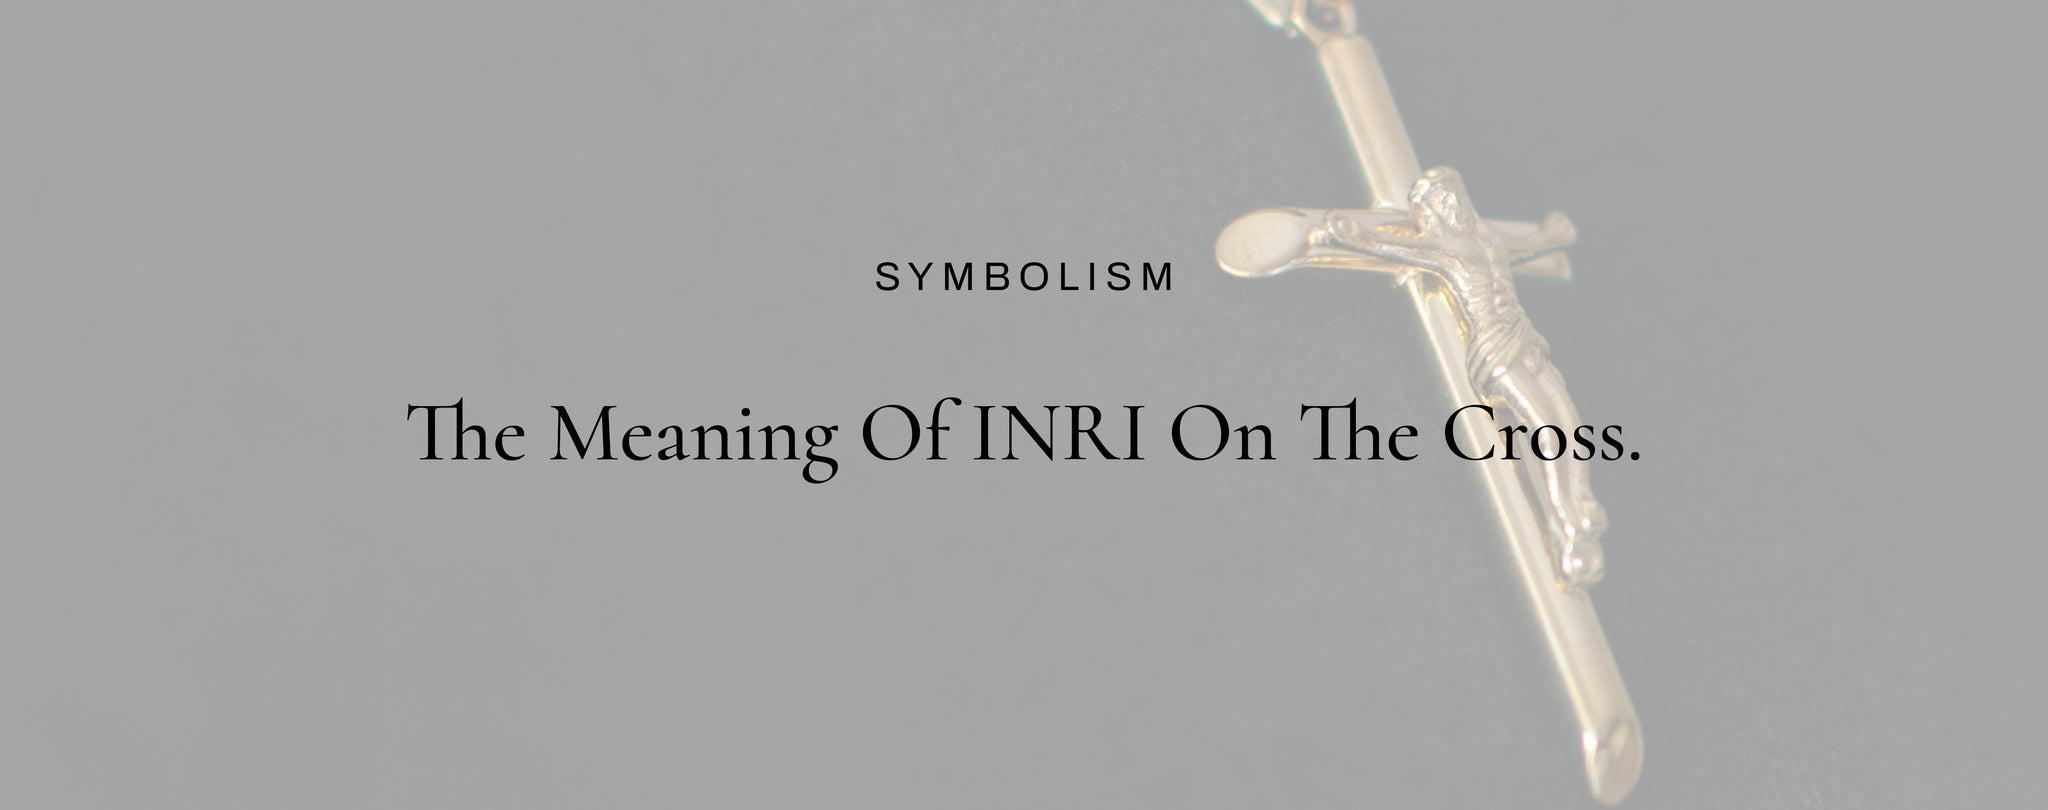 INRI meaning